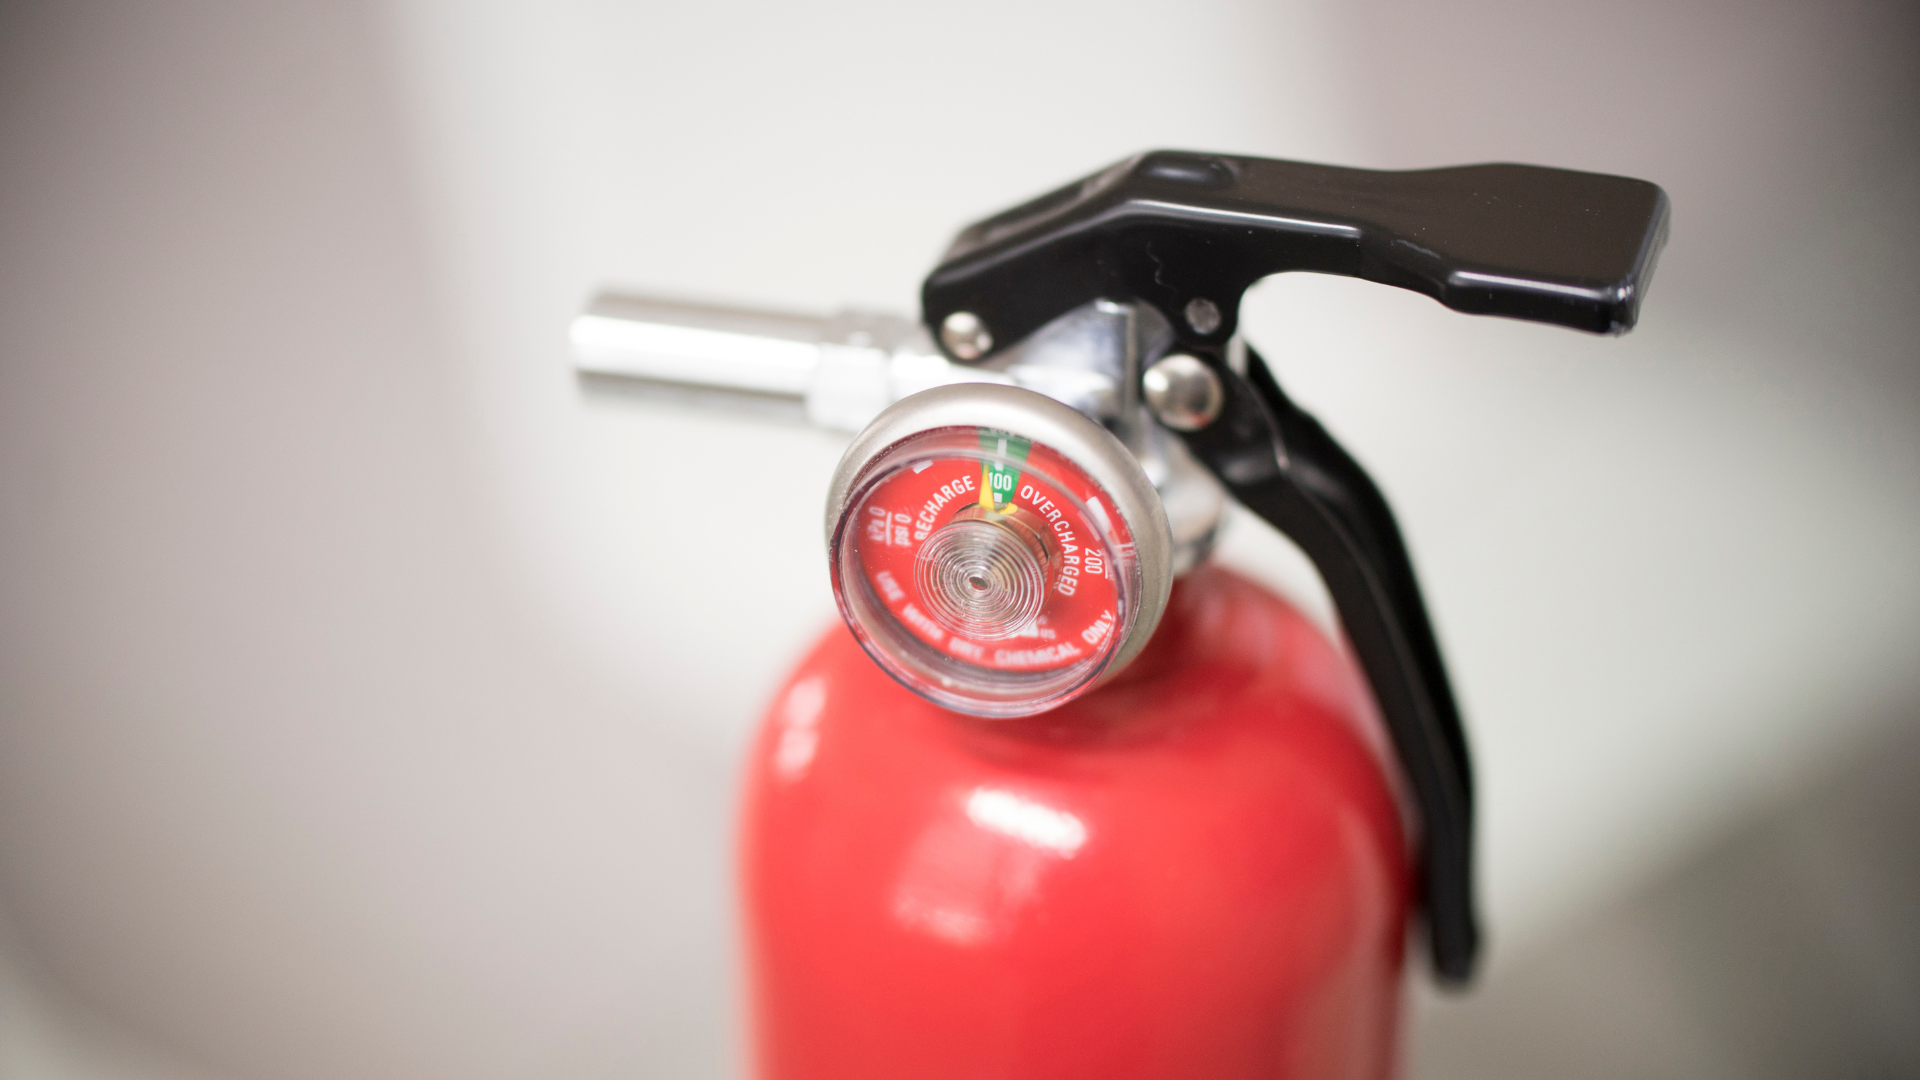 An image of a fire extinguisher.